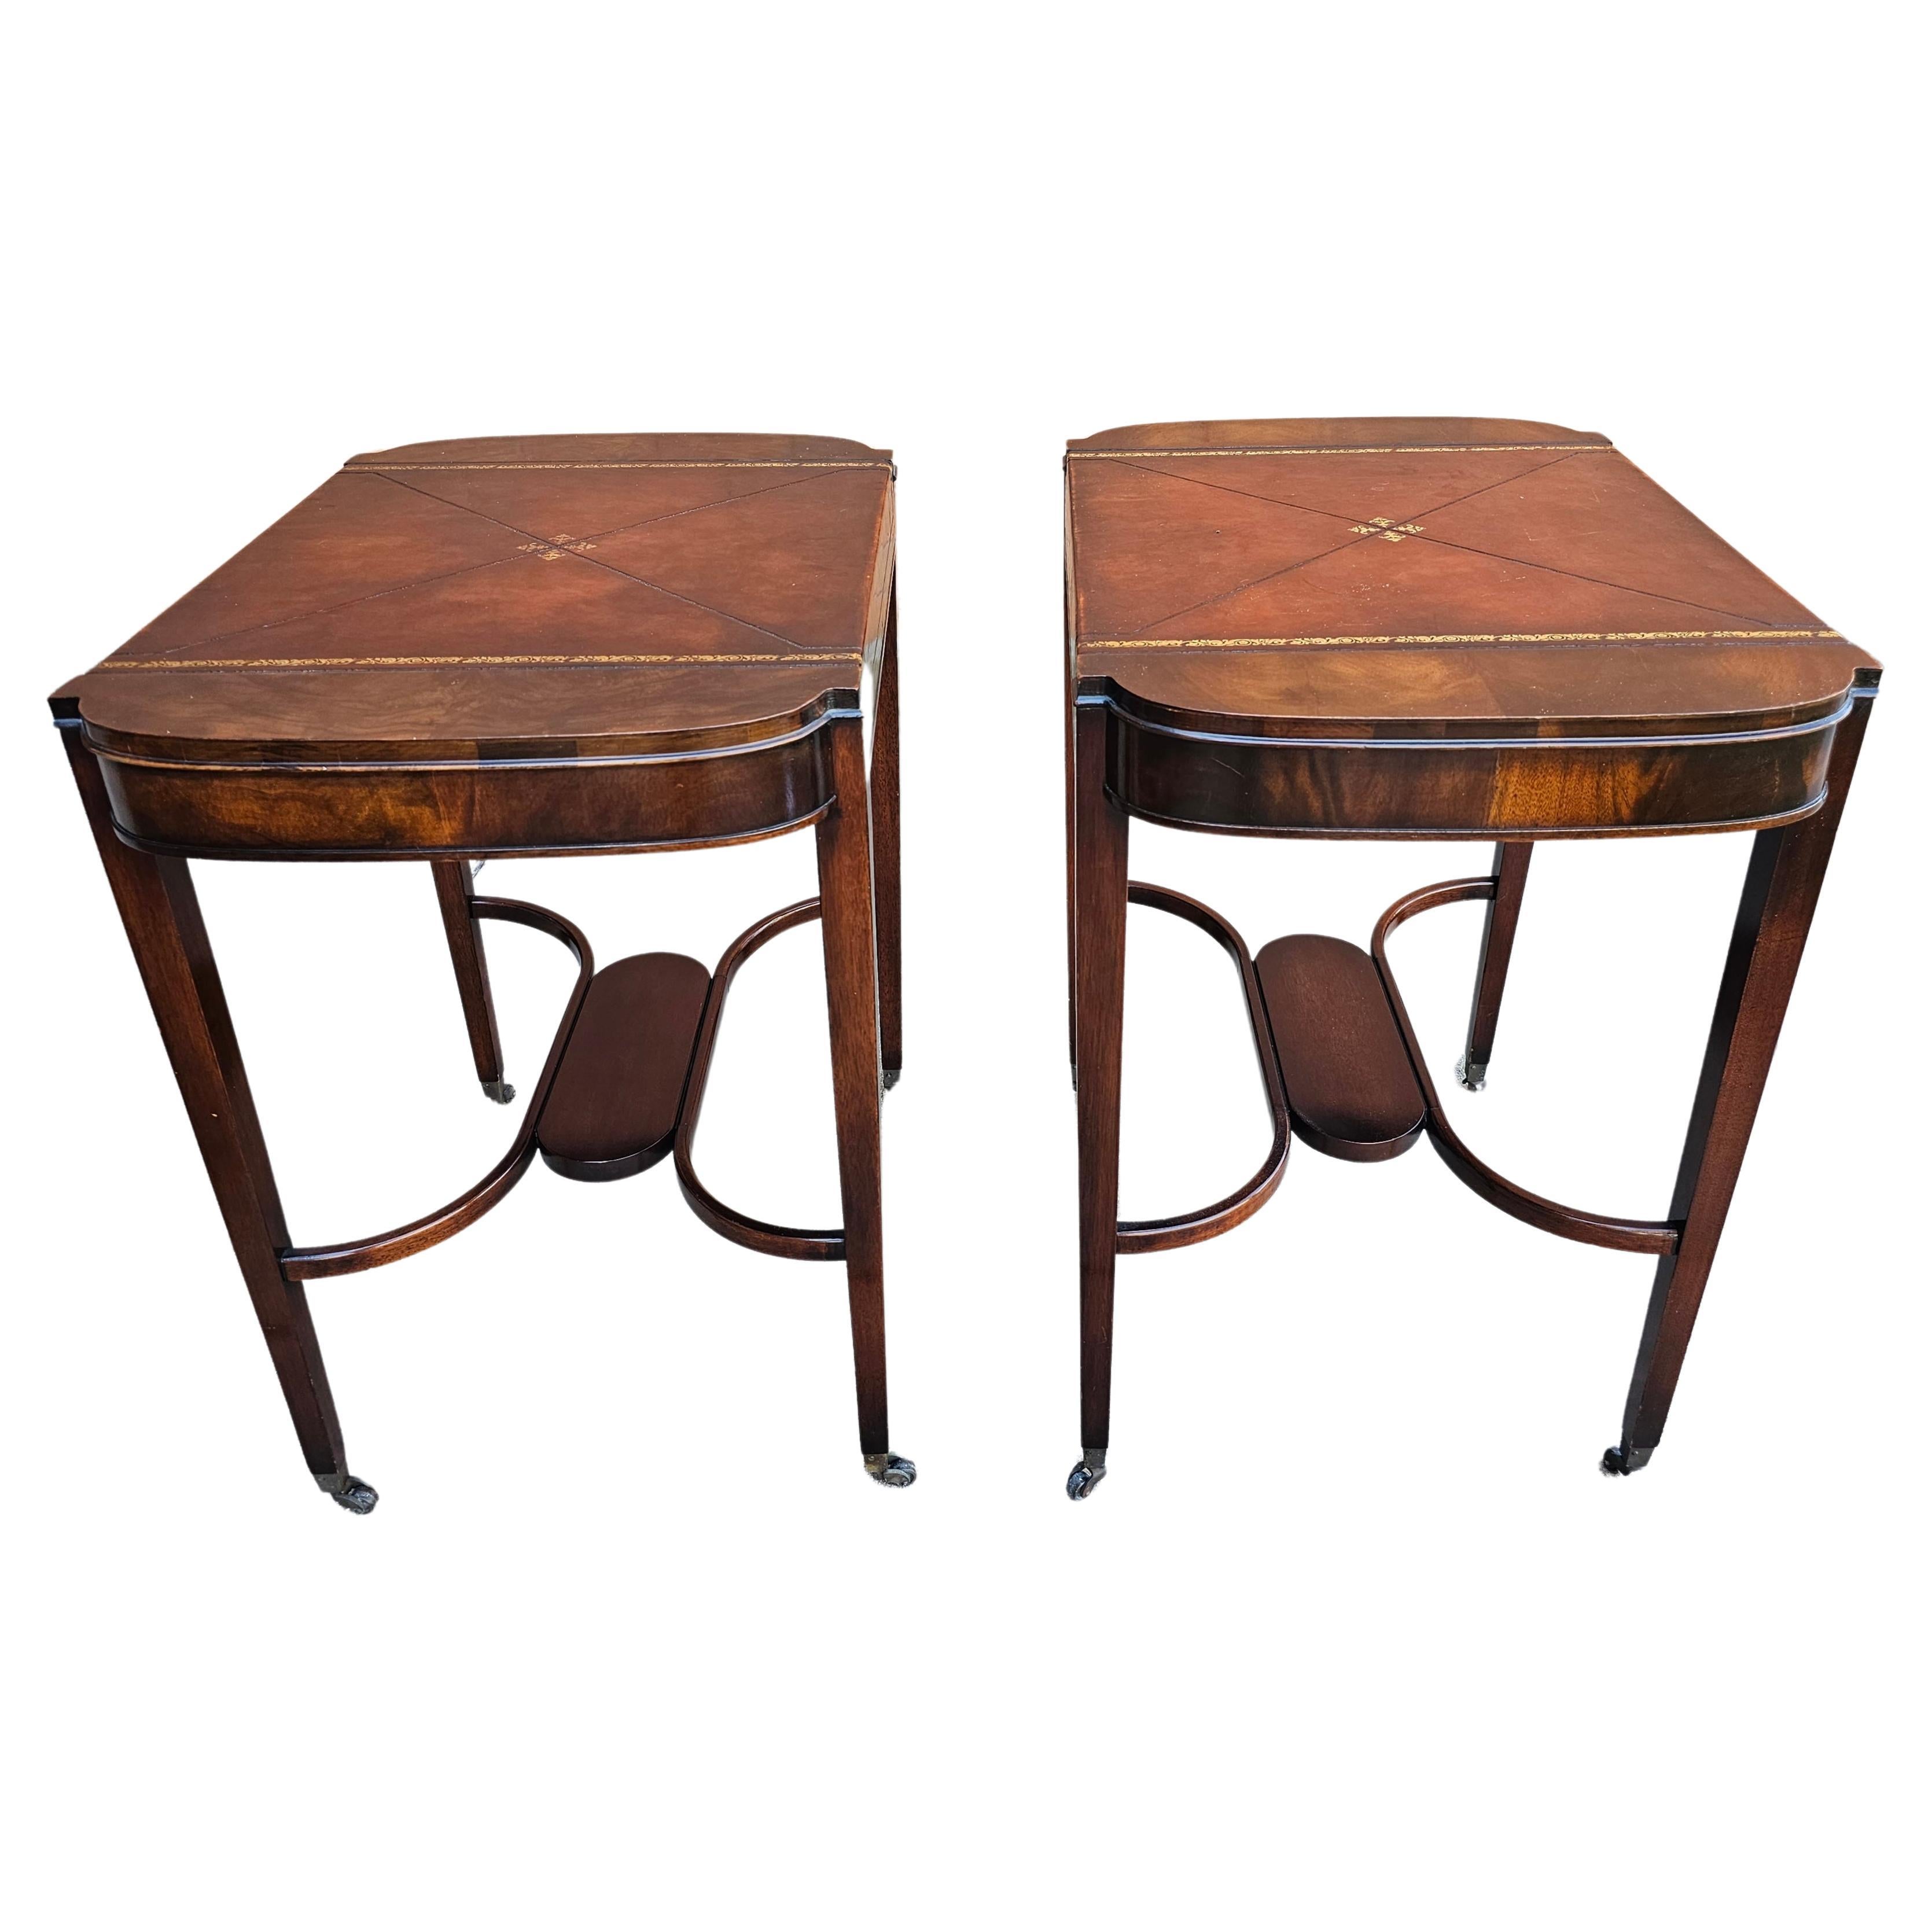 Pair Mid Century Regency Weiman Tooled Leather Top Mahogany Side Tables on wheels in great vintage condition. 17.5